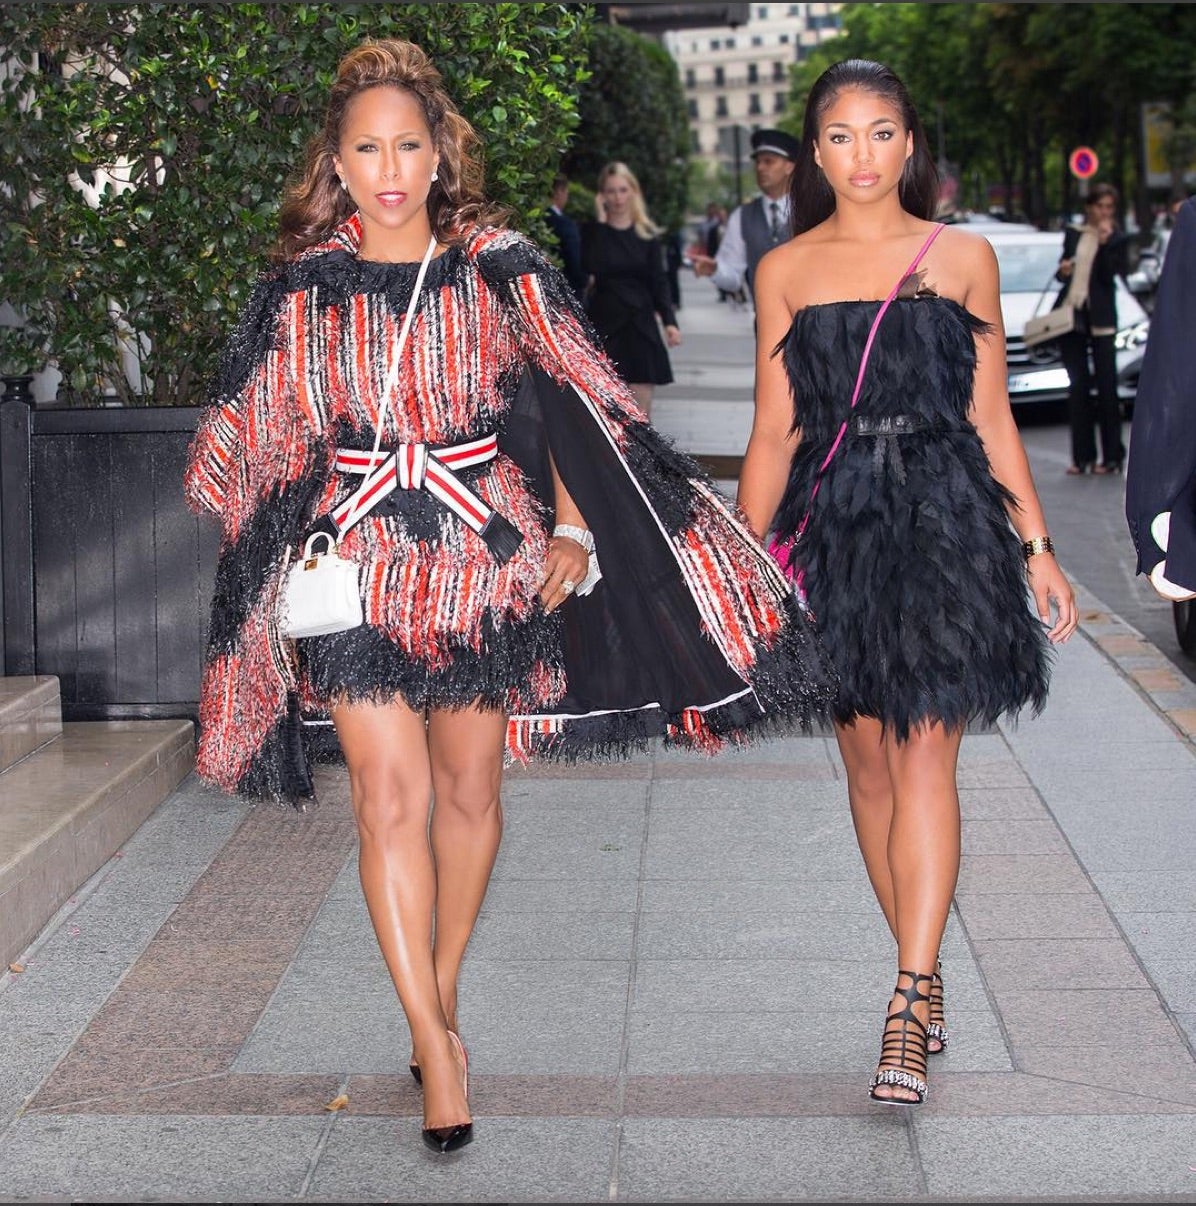 Marjorie And Lori Harvey May Be The Chicest Mother-Daughter Duo—Here's Proof!